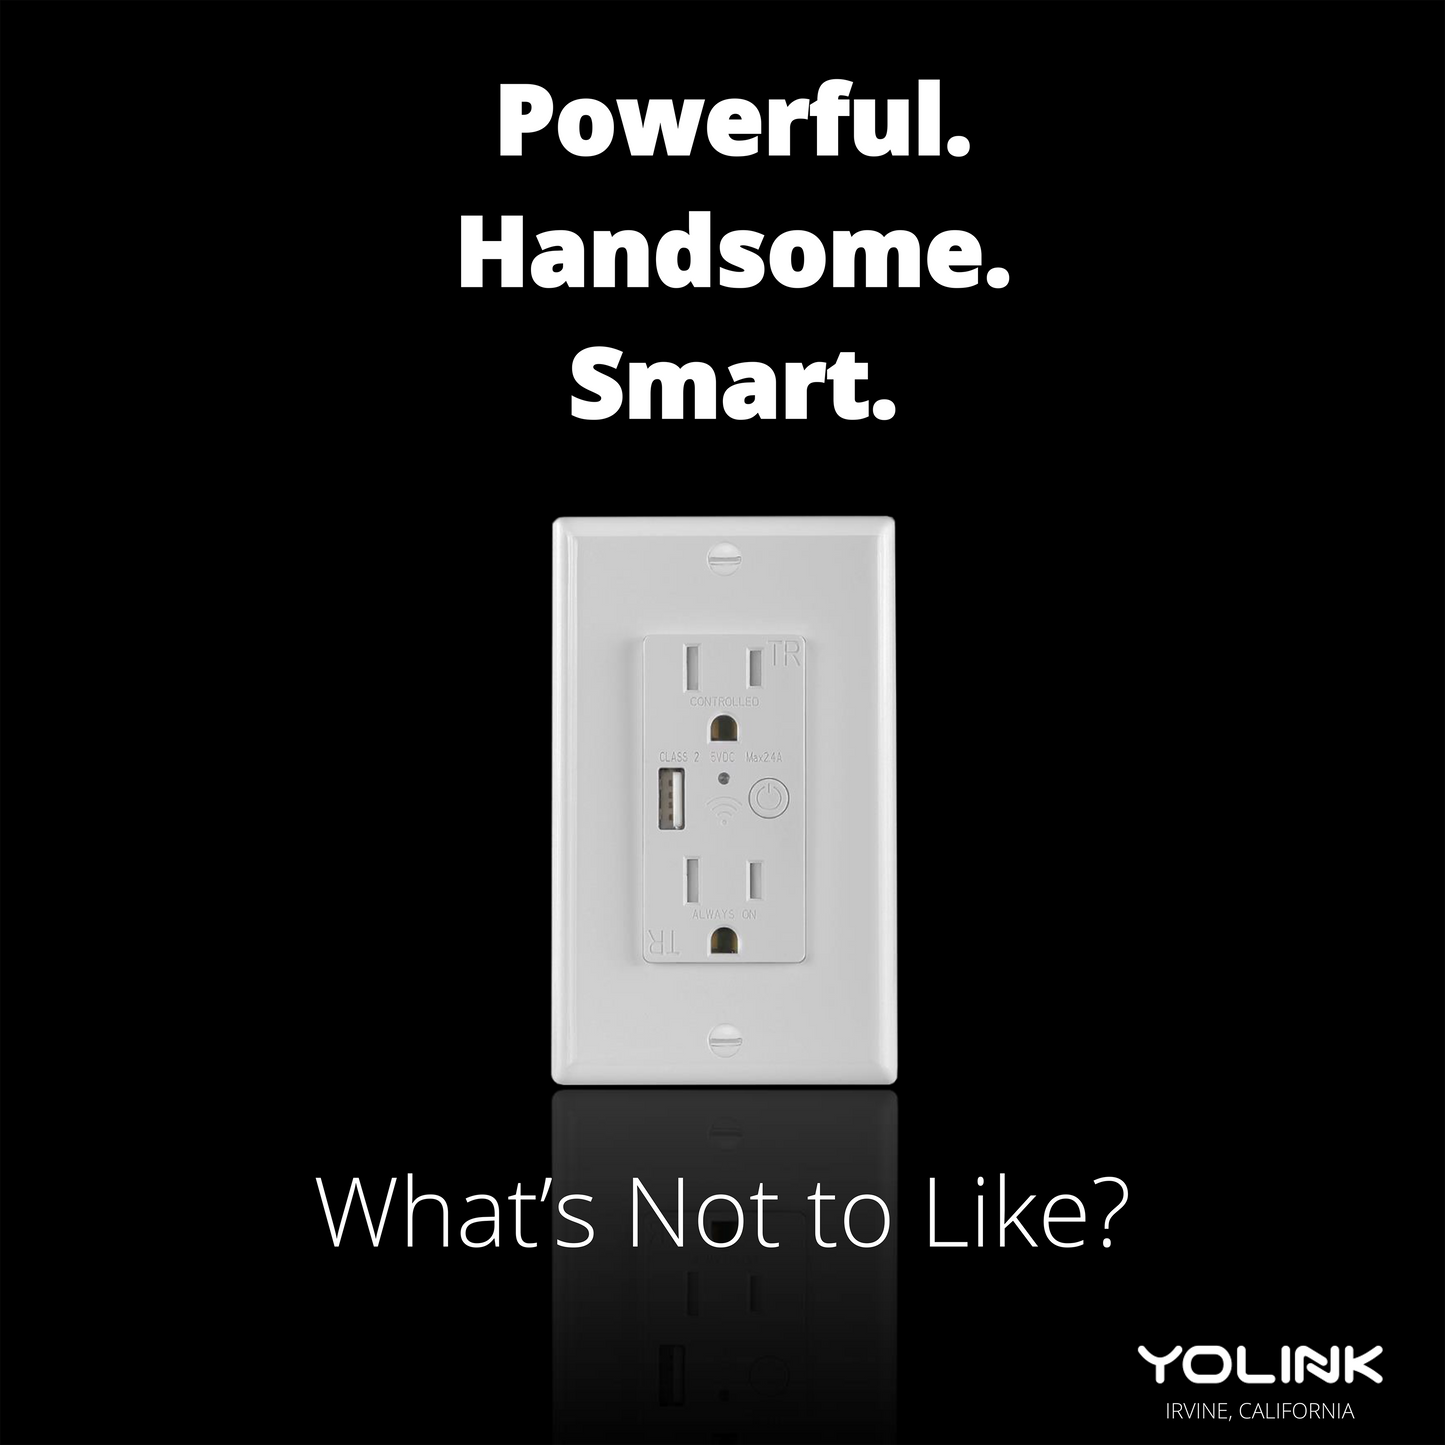 YoLink Smart In-Wall Outlet Works with Alexa, Google Assistant, and IFTTT, YoLink Hub Required - YoLink